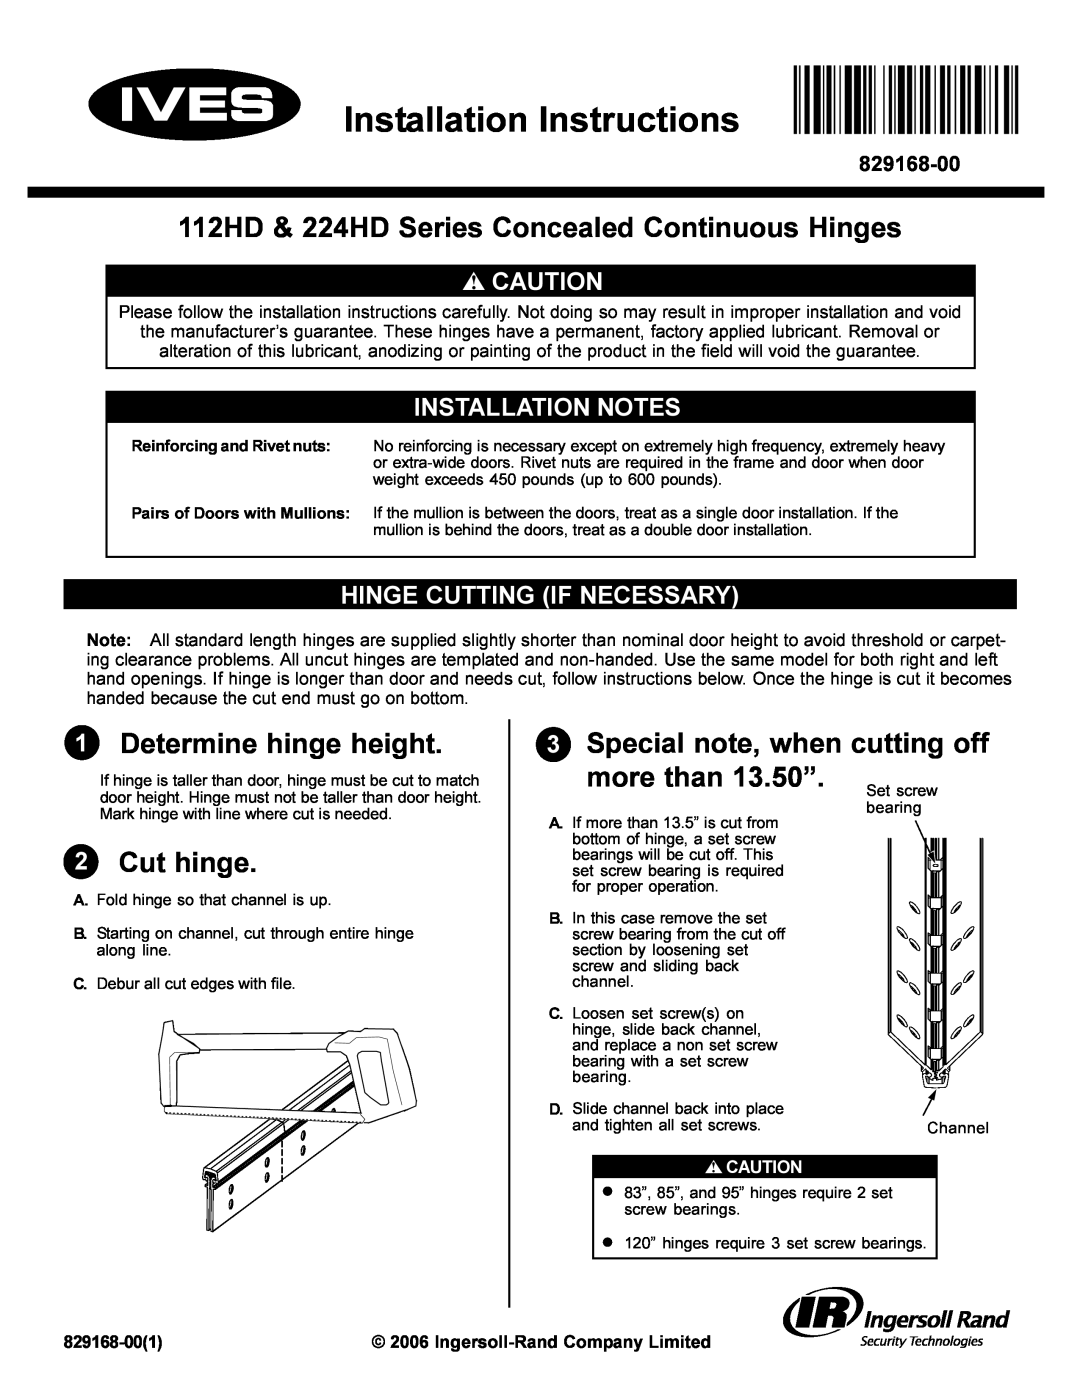 Ives installation instructions 112HD & 224HD Series Concealed Continuous Hinges, Determine hinge height, Cut hinge 